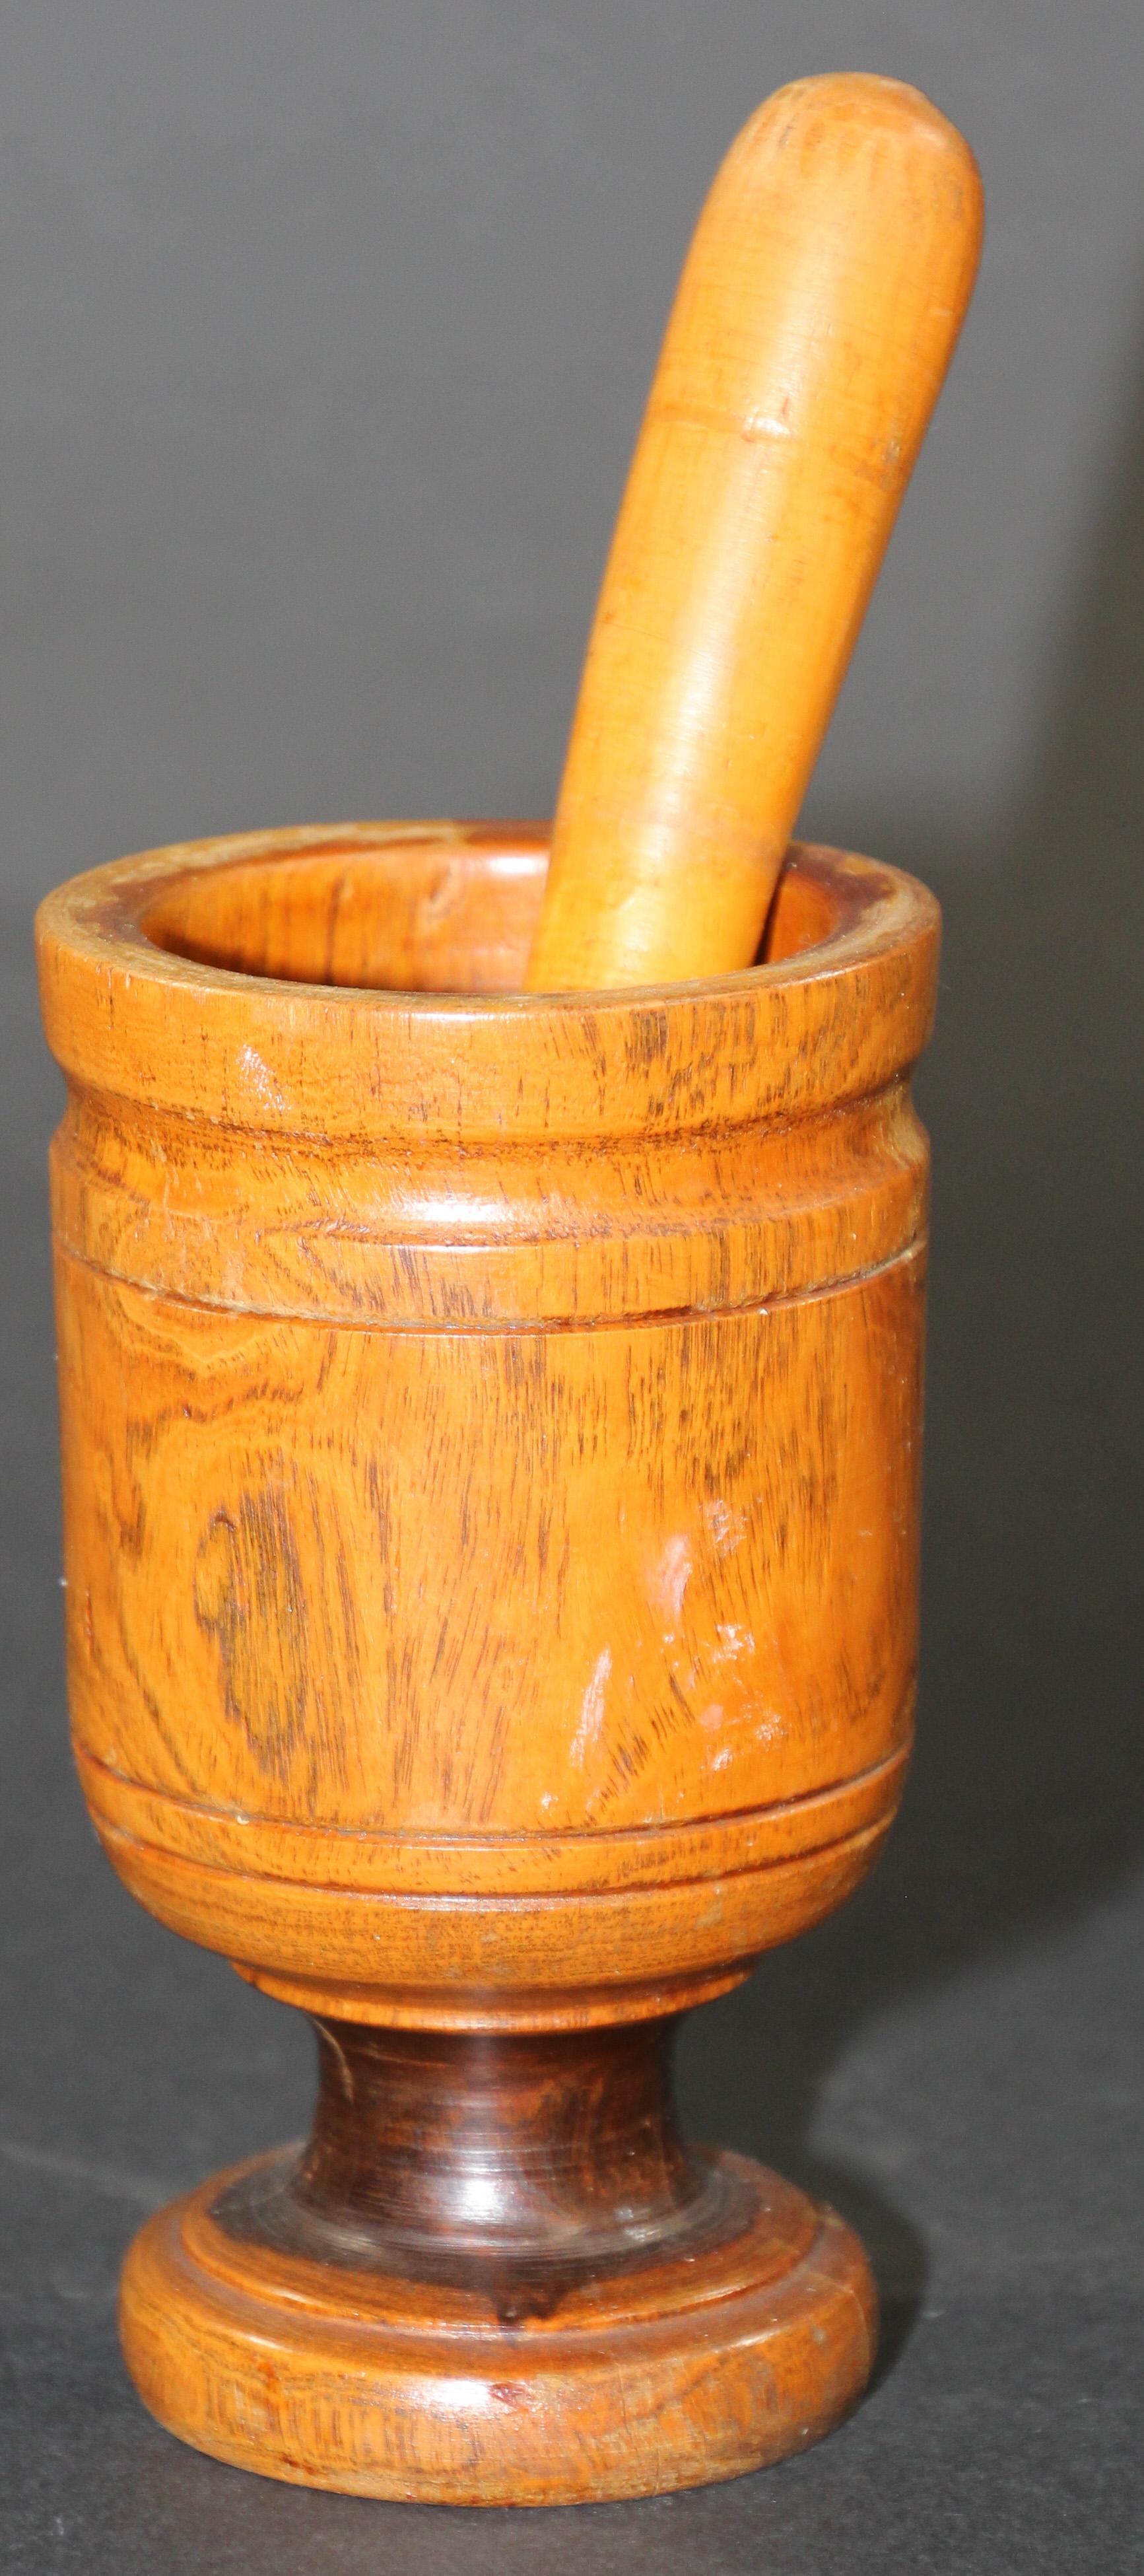 Wooden footed mortar and pestle hand turned and carved from one piece of dense fruitwood. 
Handcrafted by artisan in Italy, vintage Mid-Century Modern hand turned wood Mortar and Pestle.
Display it on your kitchen island or in a bookcase and just